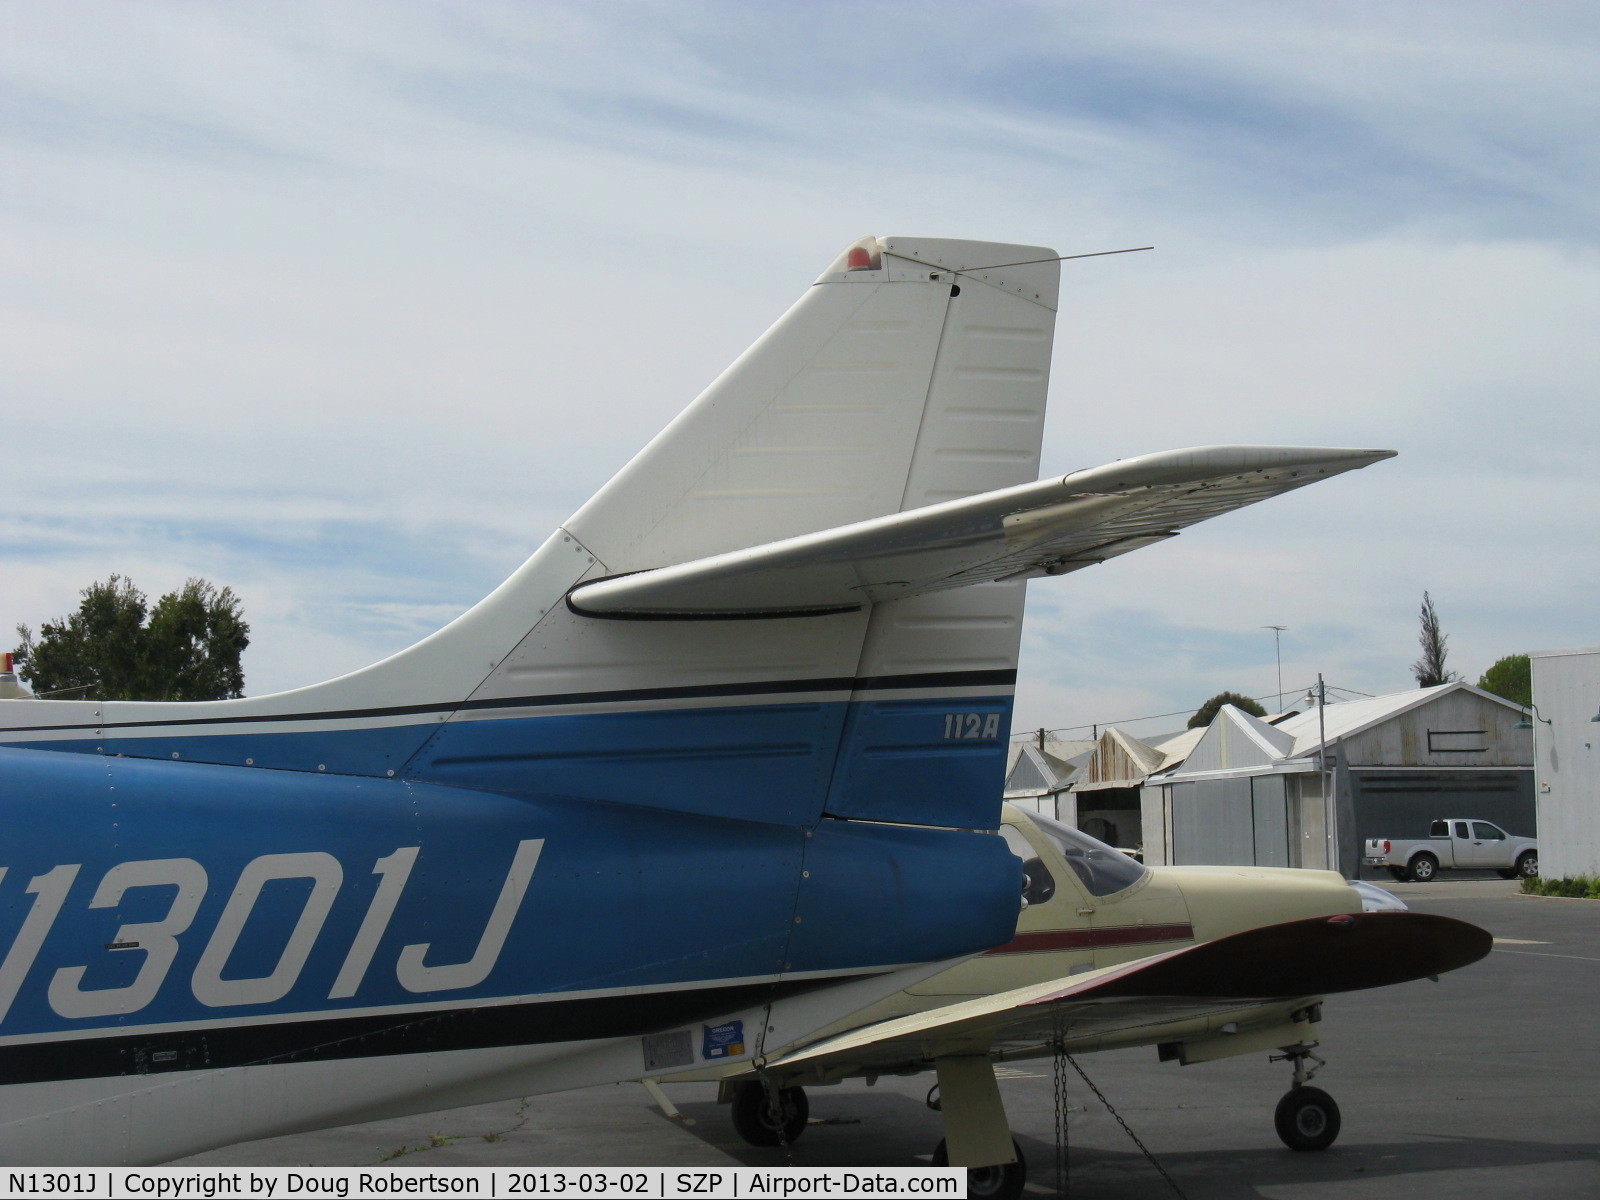 N1301J, 1975 Rockwell International 112A Commander C/N 301, 1975 Rockwell COMMANDER 112A, Lycoming IO-360-C1D6 200 Hp, cruciform tail, a modern, strong design to FAR Part 23.7